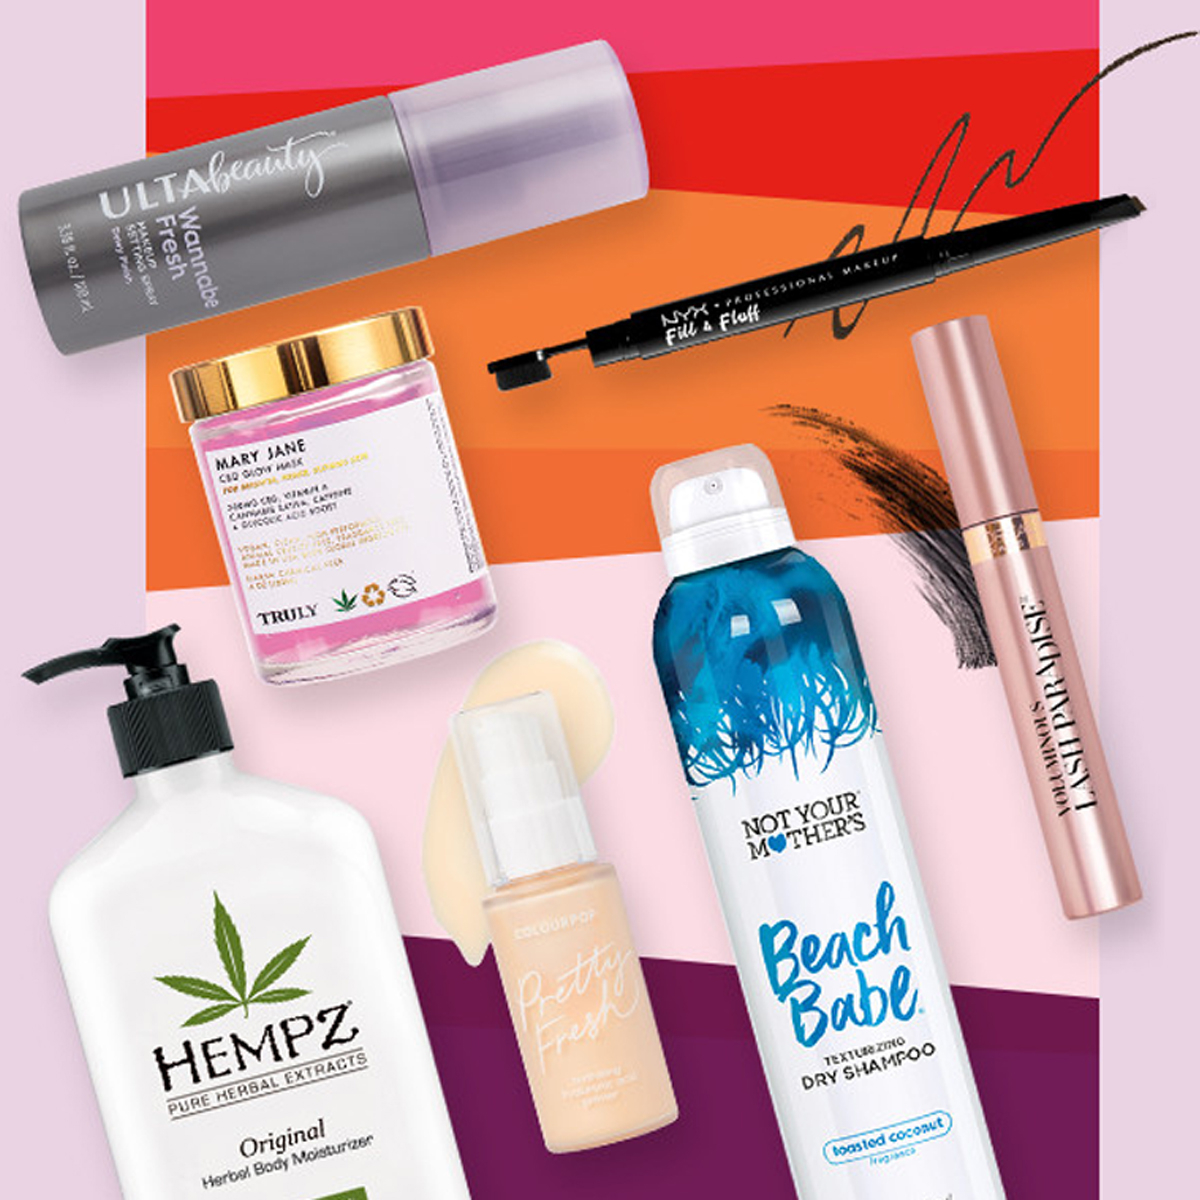 UPCOMING Ulta Beauty Fall Haul Event UP TO 50% OFF - Beauty Deals BFF